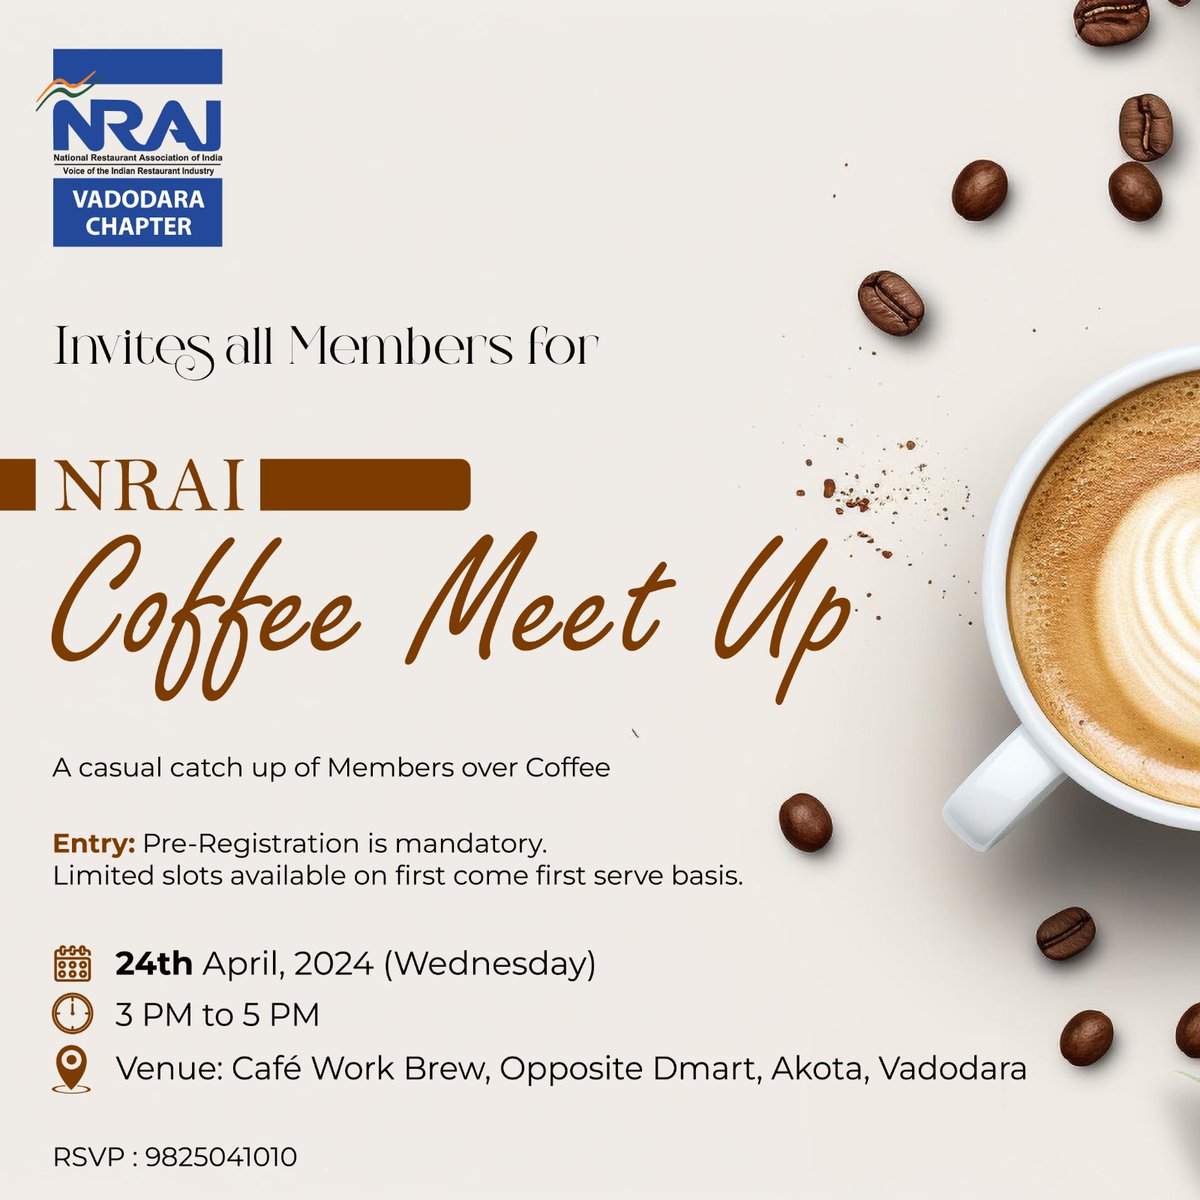 ☕️ Join us for a casual catch-up over coffee! NRAI Vadodara Chapter invites all members to connect and network at our exclusive event. On April 24, 3:00 PM to 5:00 PM at Café Work Brew, Opposite Dmart, Akota, Vadodara RSVP: 9825041010 #NRAIEvents #Networking #CoffeeCatchUp